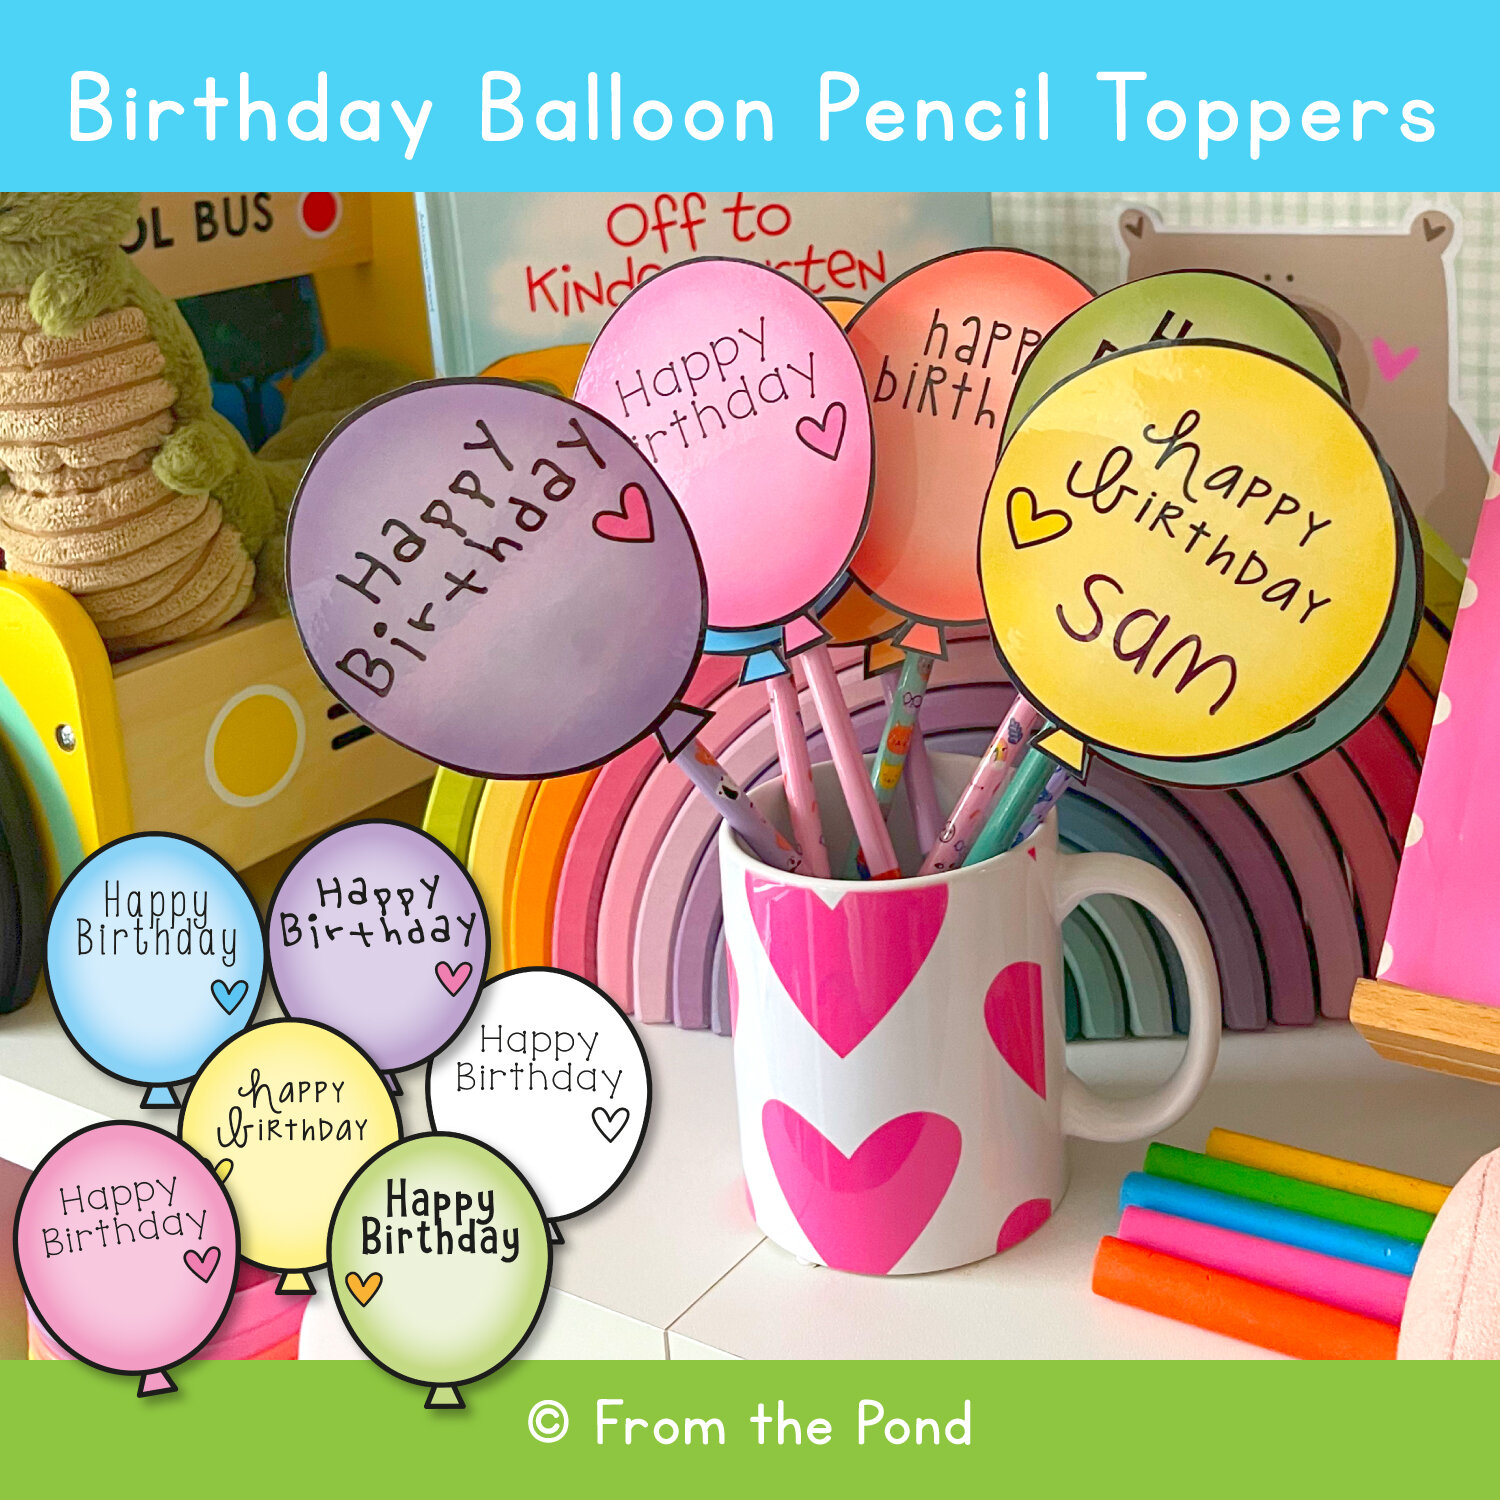 Balloon Pencil Toppers